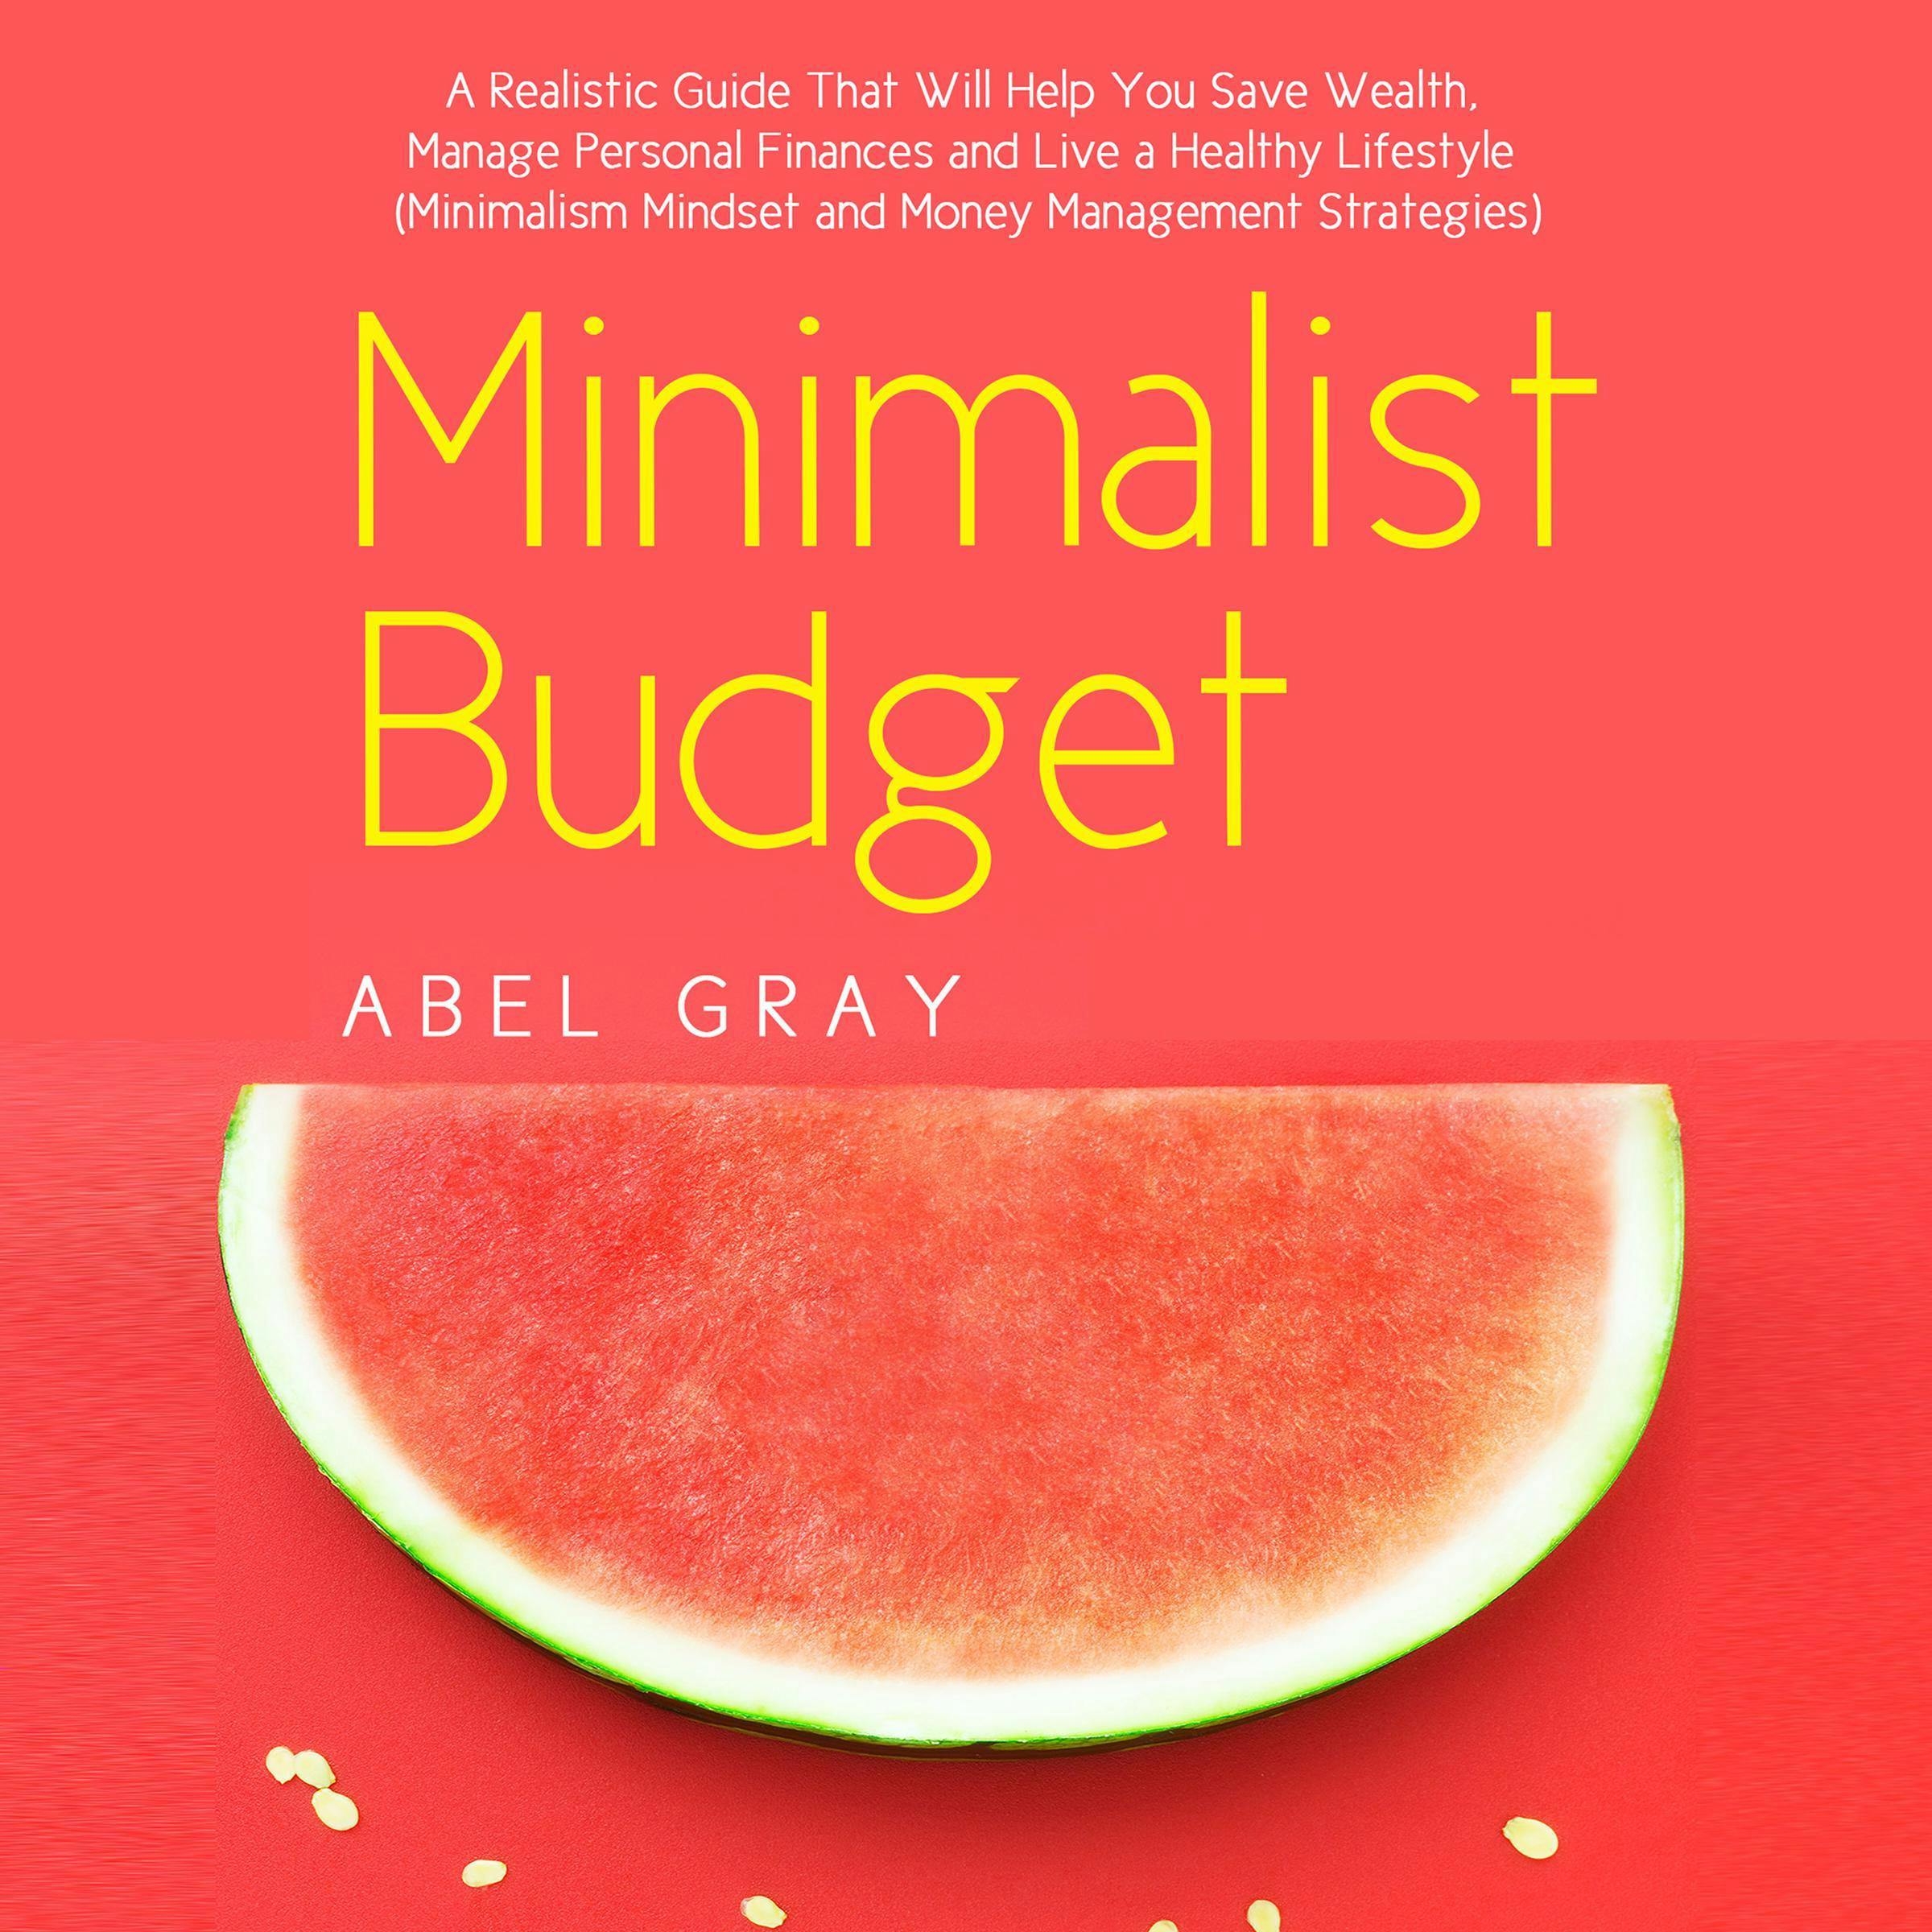 Minimalist Budget: The Realistic Guide That Will Help You Save Wealth, Manage Personal Finances and Live a Healthy Lifestyle (Minimalism Mindset and Money Management Strategies) - Abel Gray